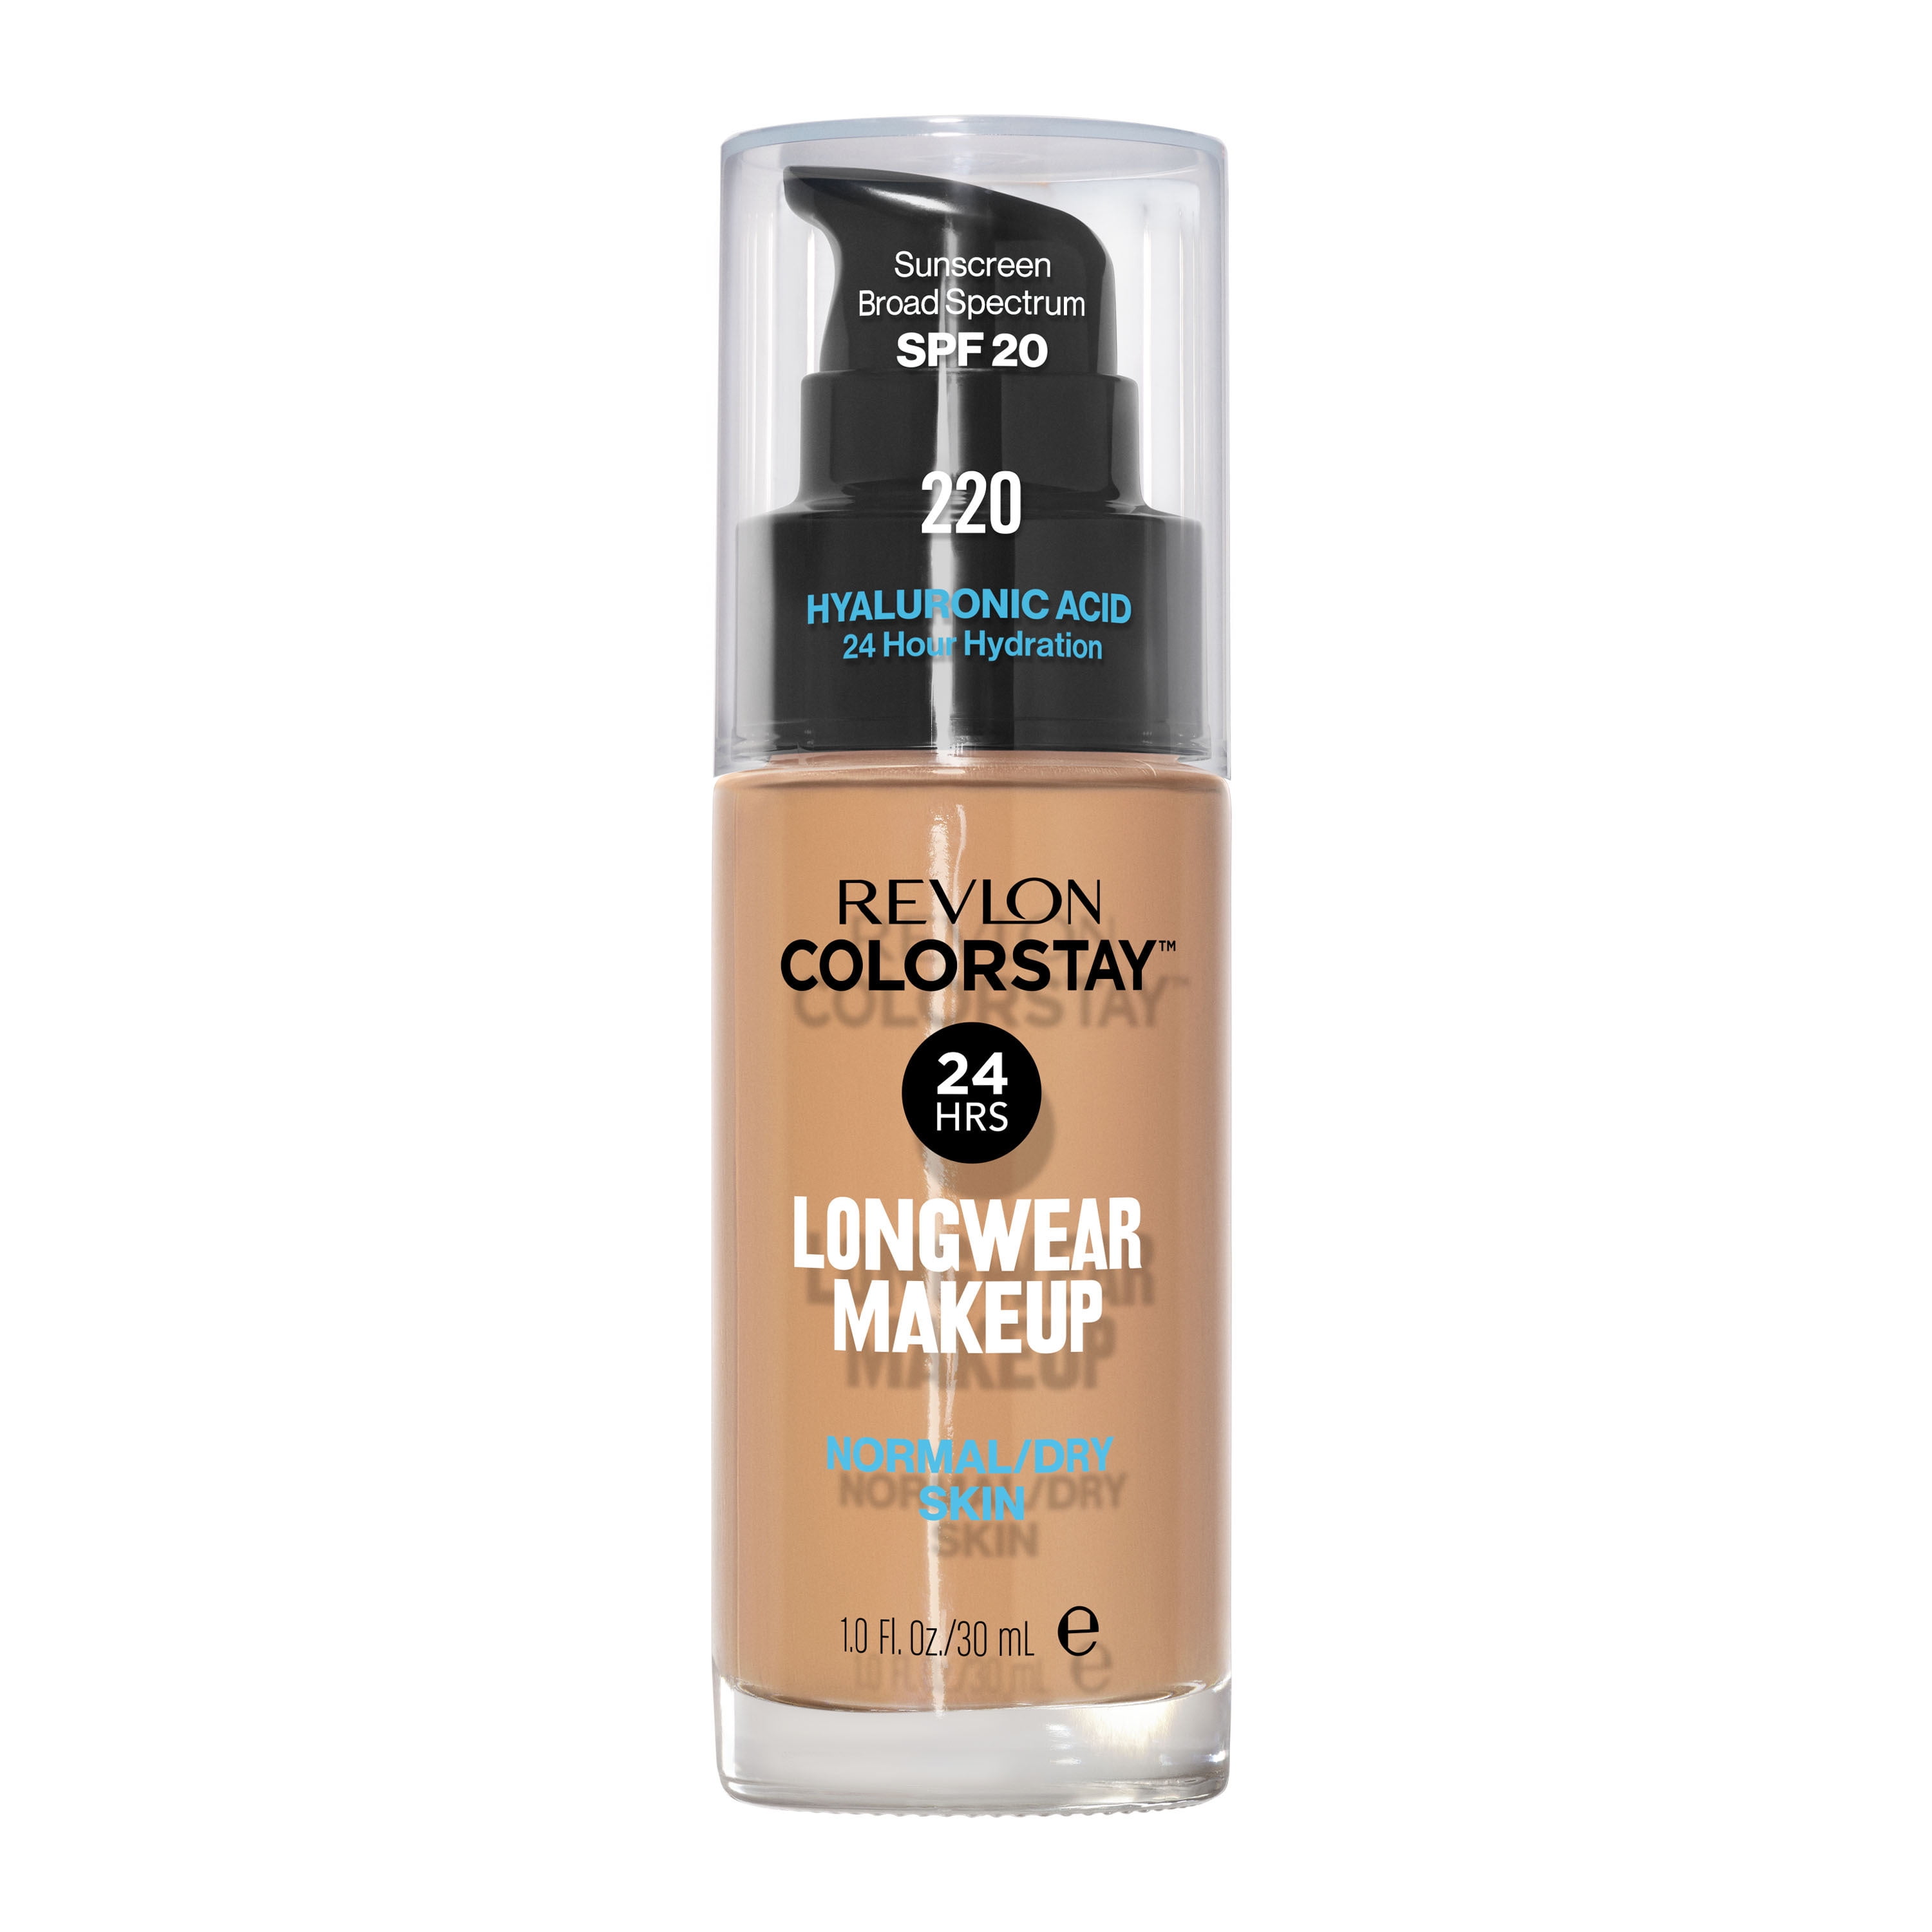 Revlon ColorStay Liquid Foundation Makeup for Normal/Dry Skin SPF 20, Longwear with Medium-Full Coverage & Natural Finish, Oil Free, 220 Natural Beige, 1 fl oz